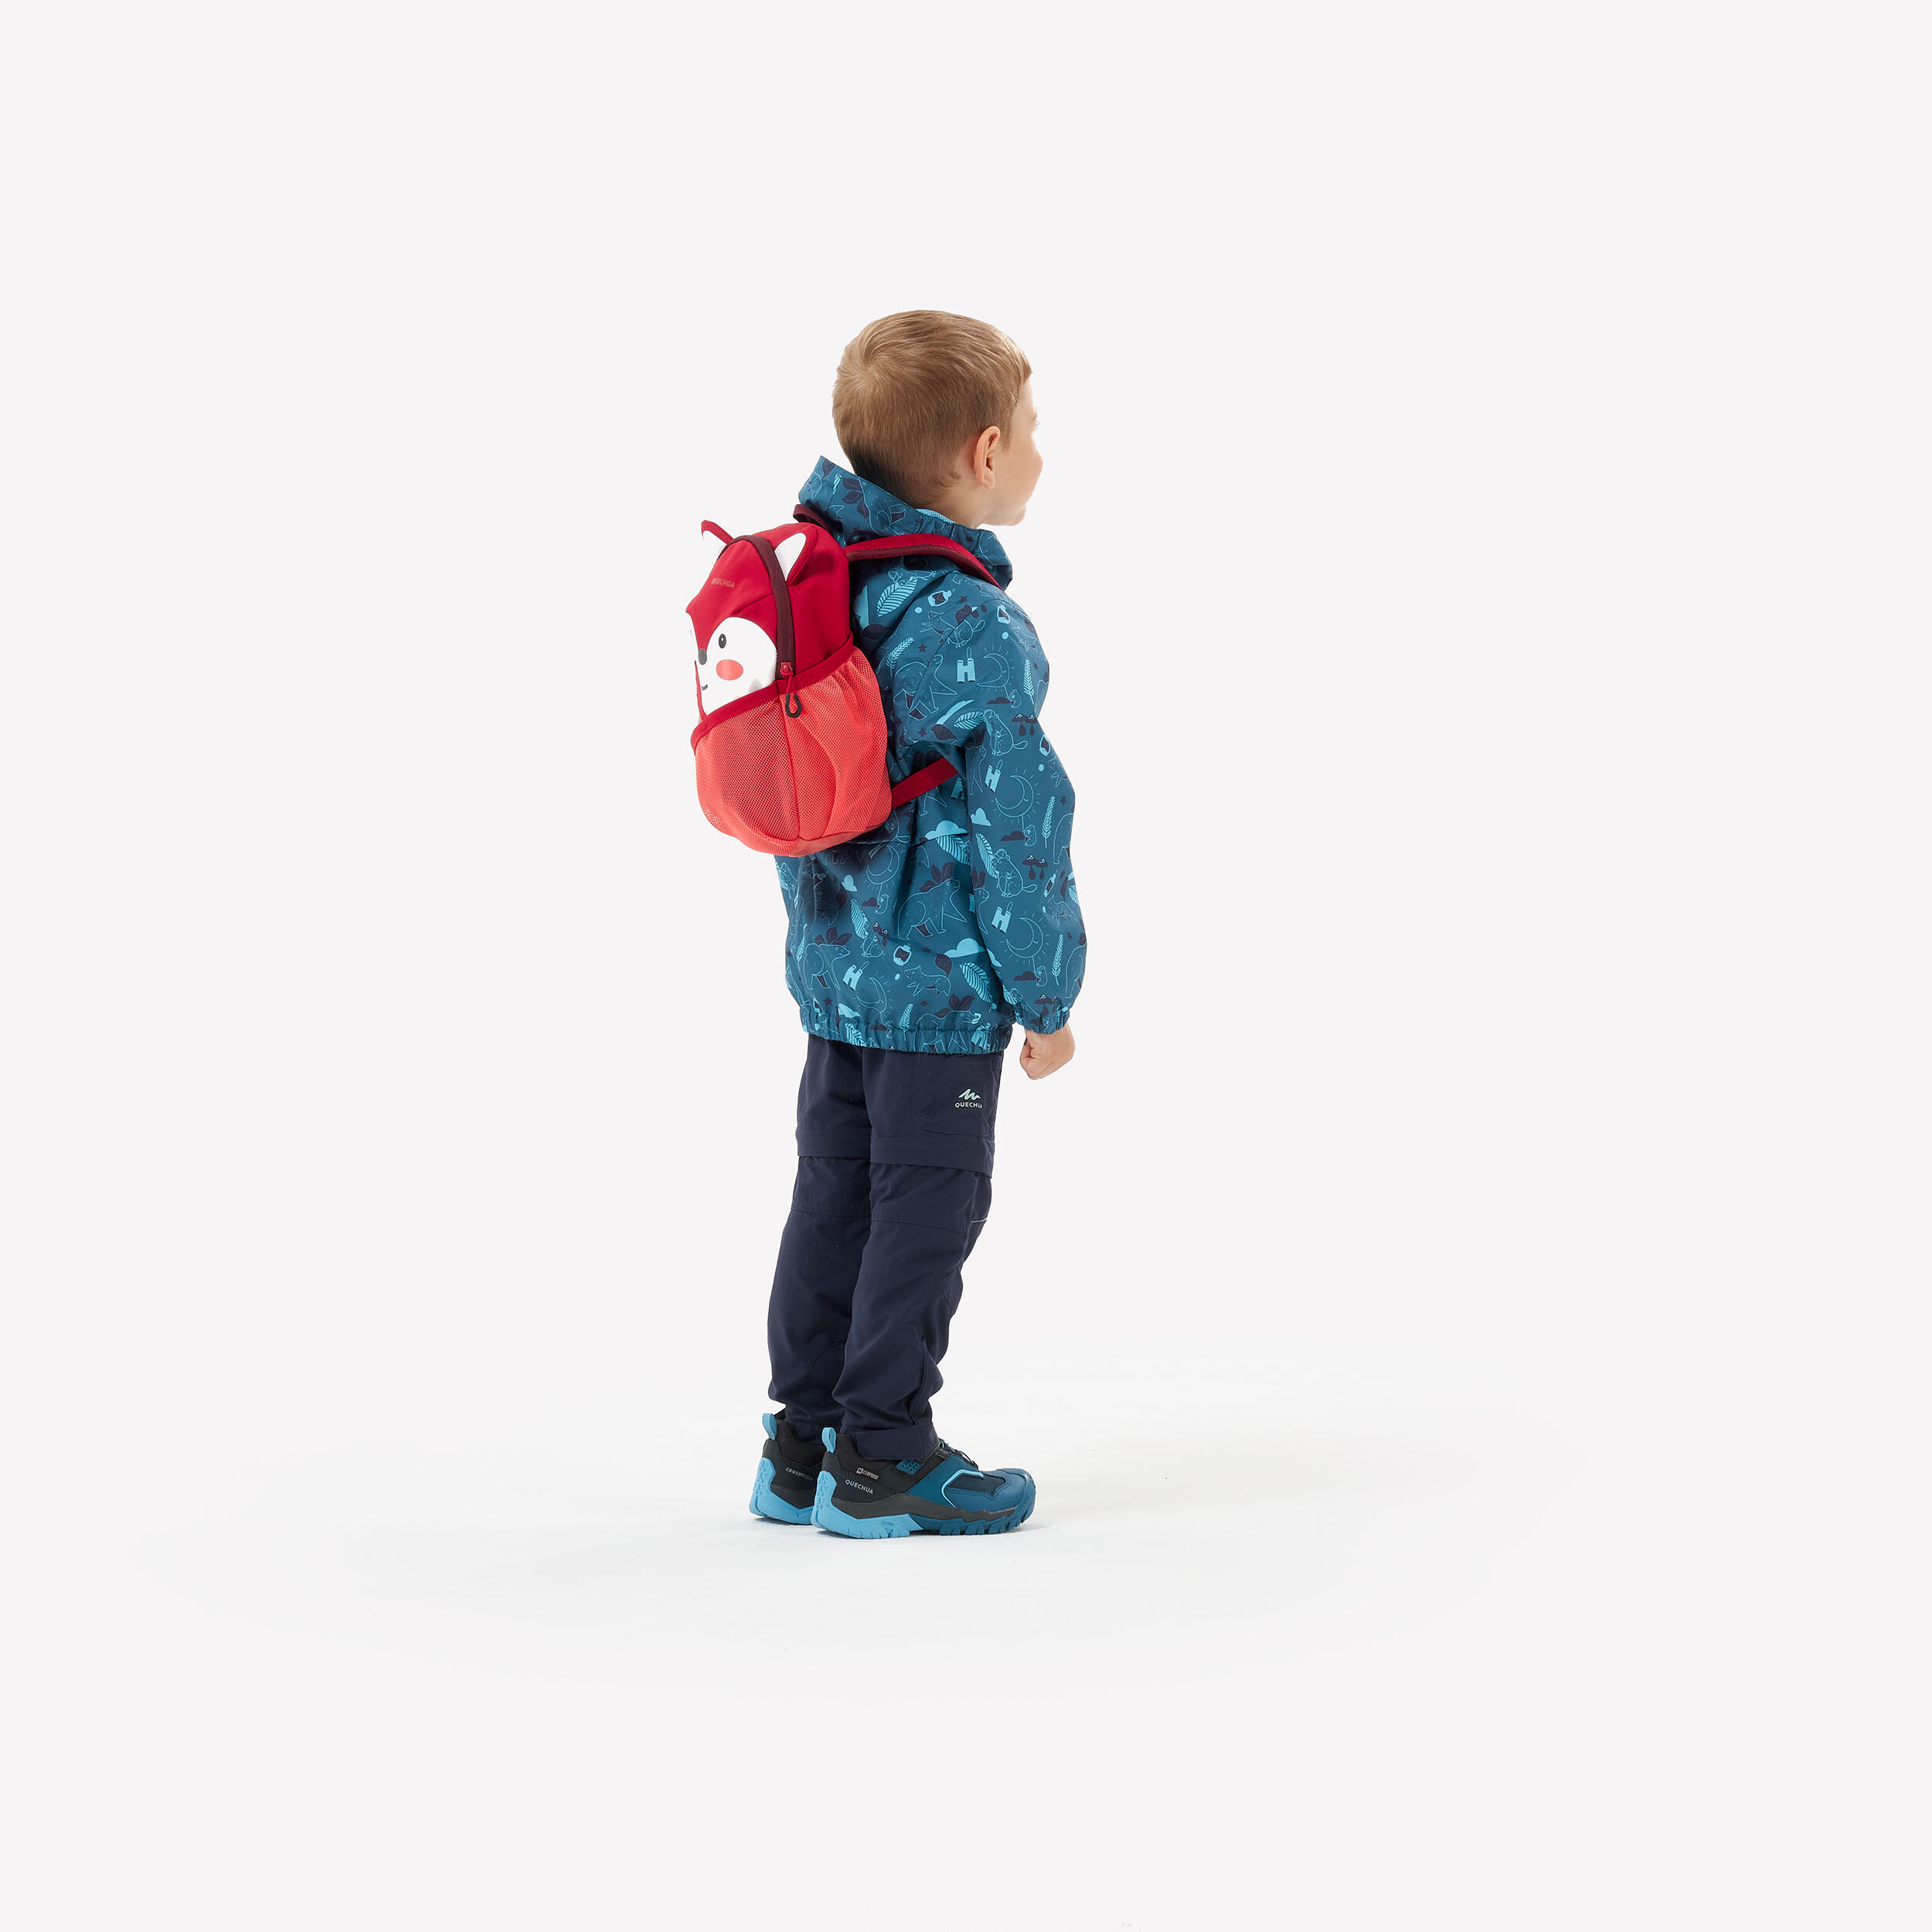 Kids' hiking small backpack 5L - MH100 7/7